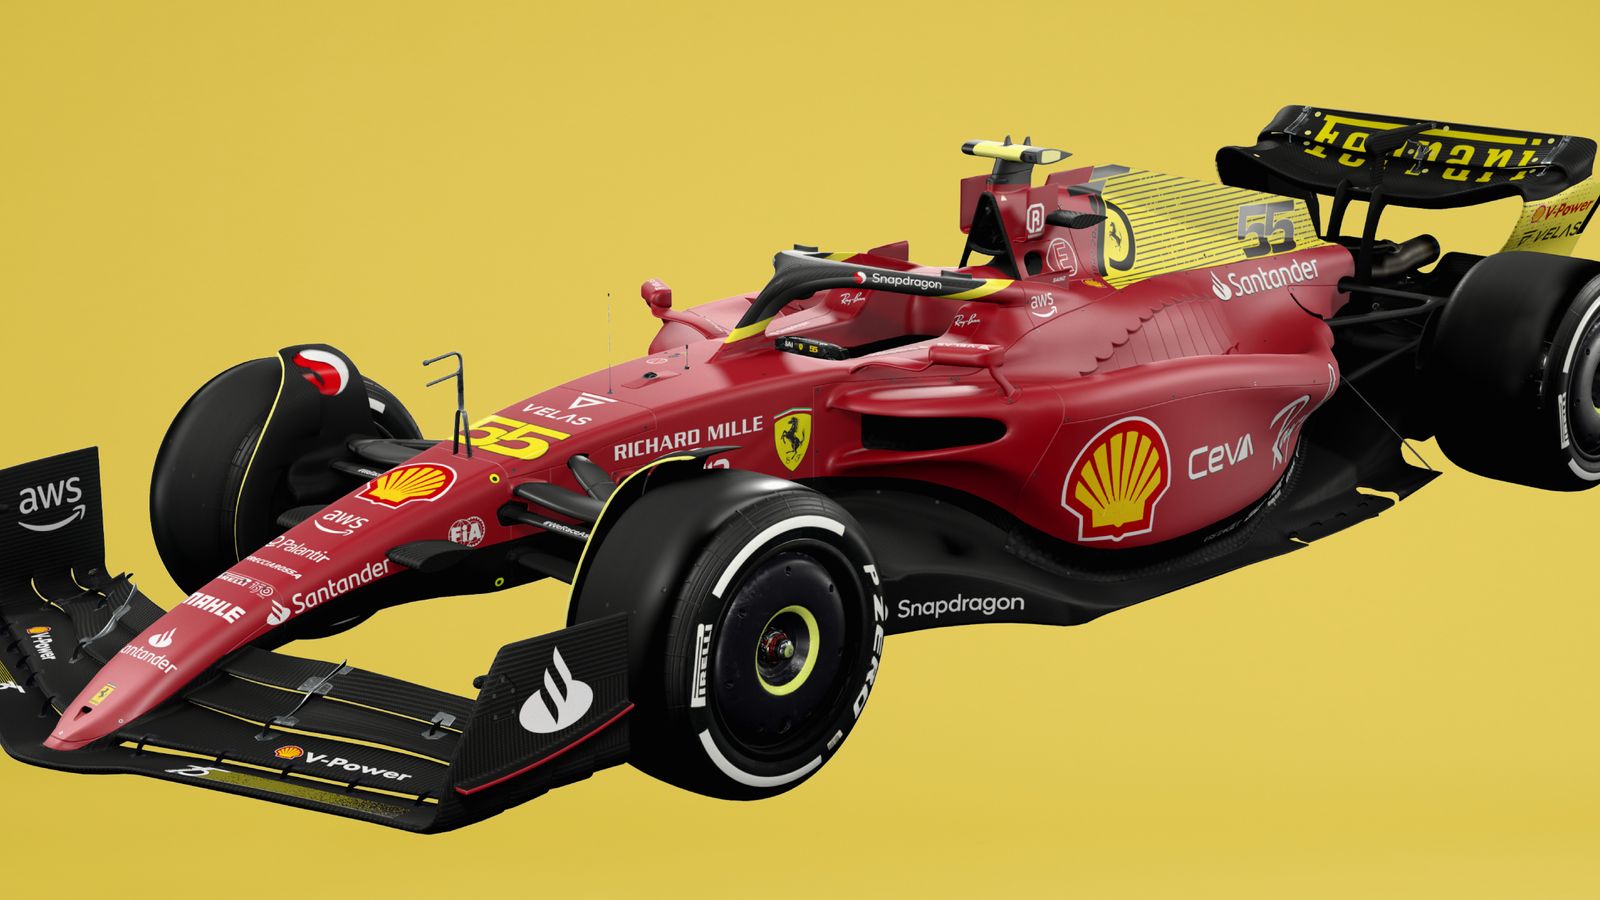 Italian GP Ferrari reveal special yellow look for home race as team celebrate 75th anniversary